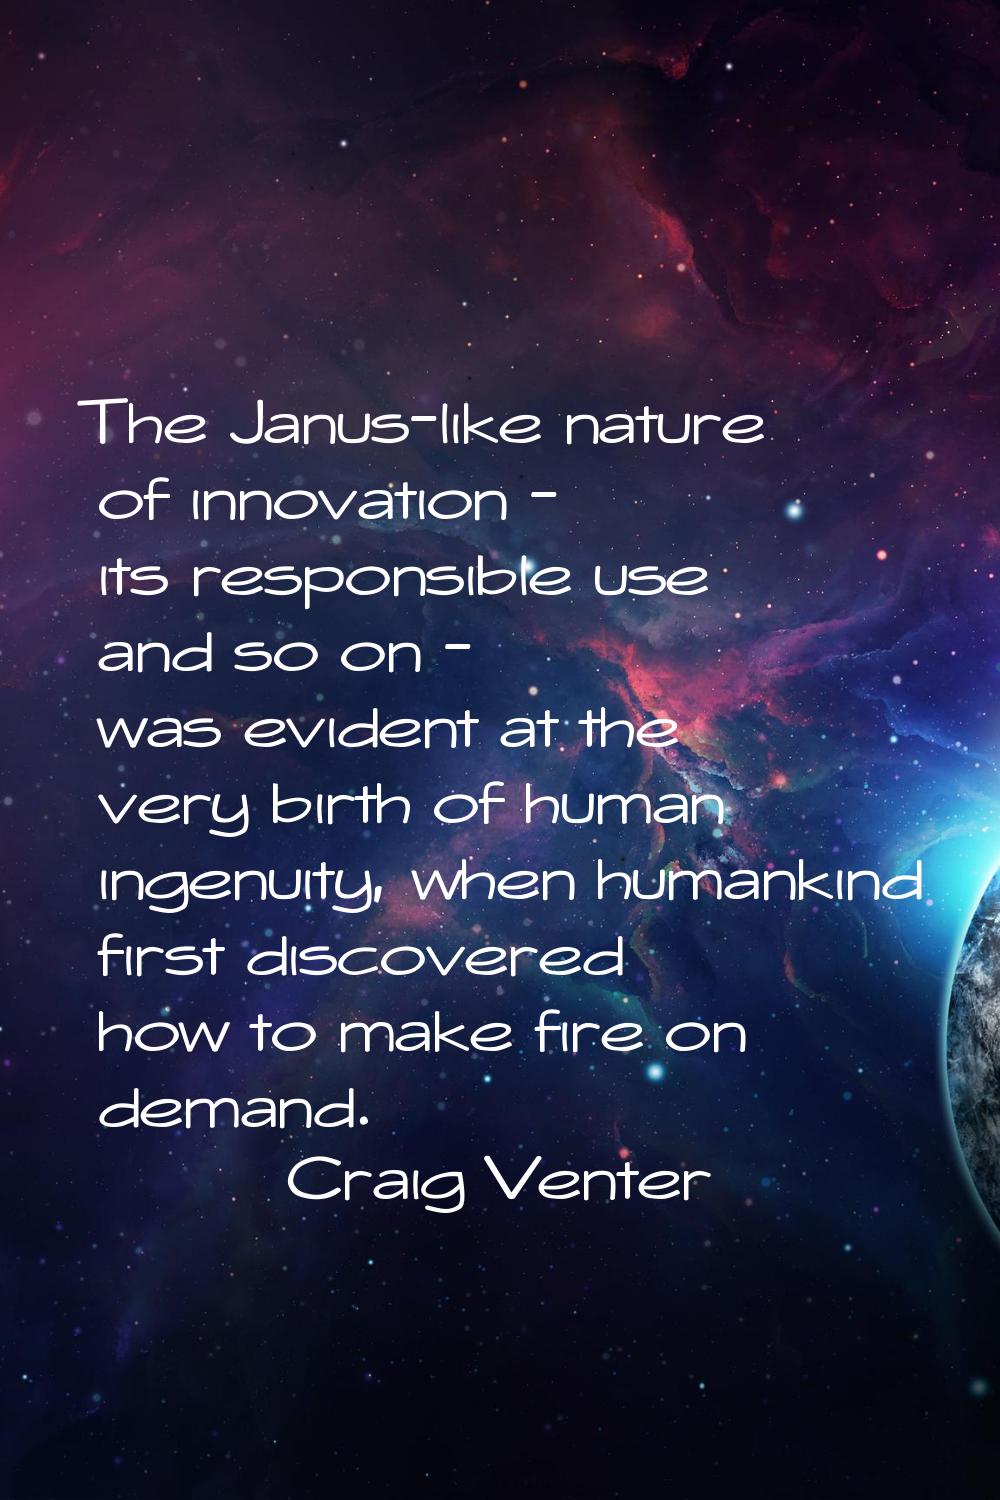 The Janus-like nature of innovation - its responsible use and so on - was evident at the very birth